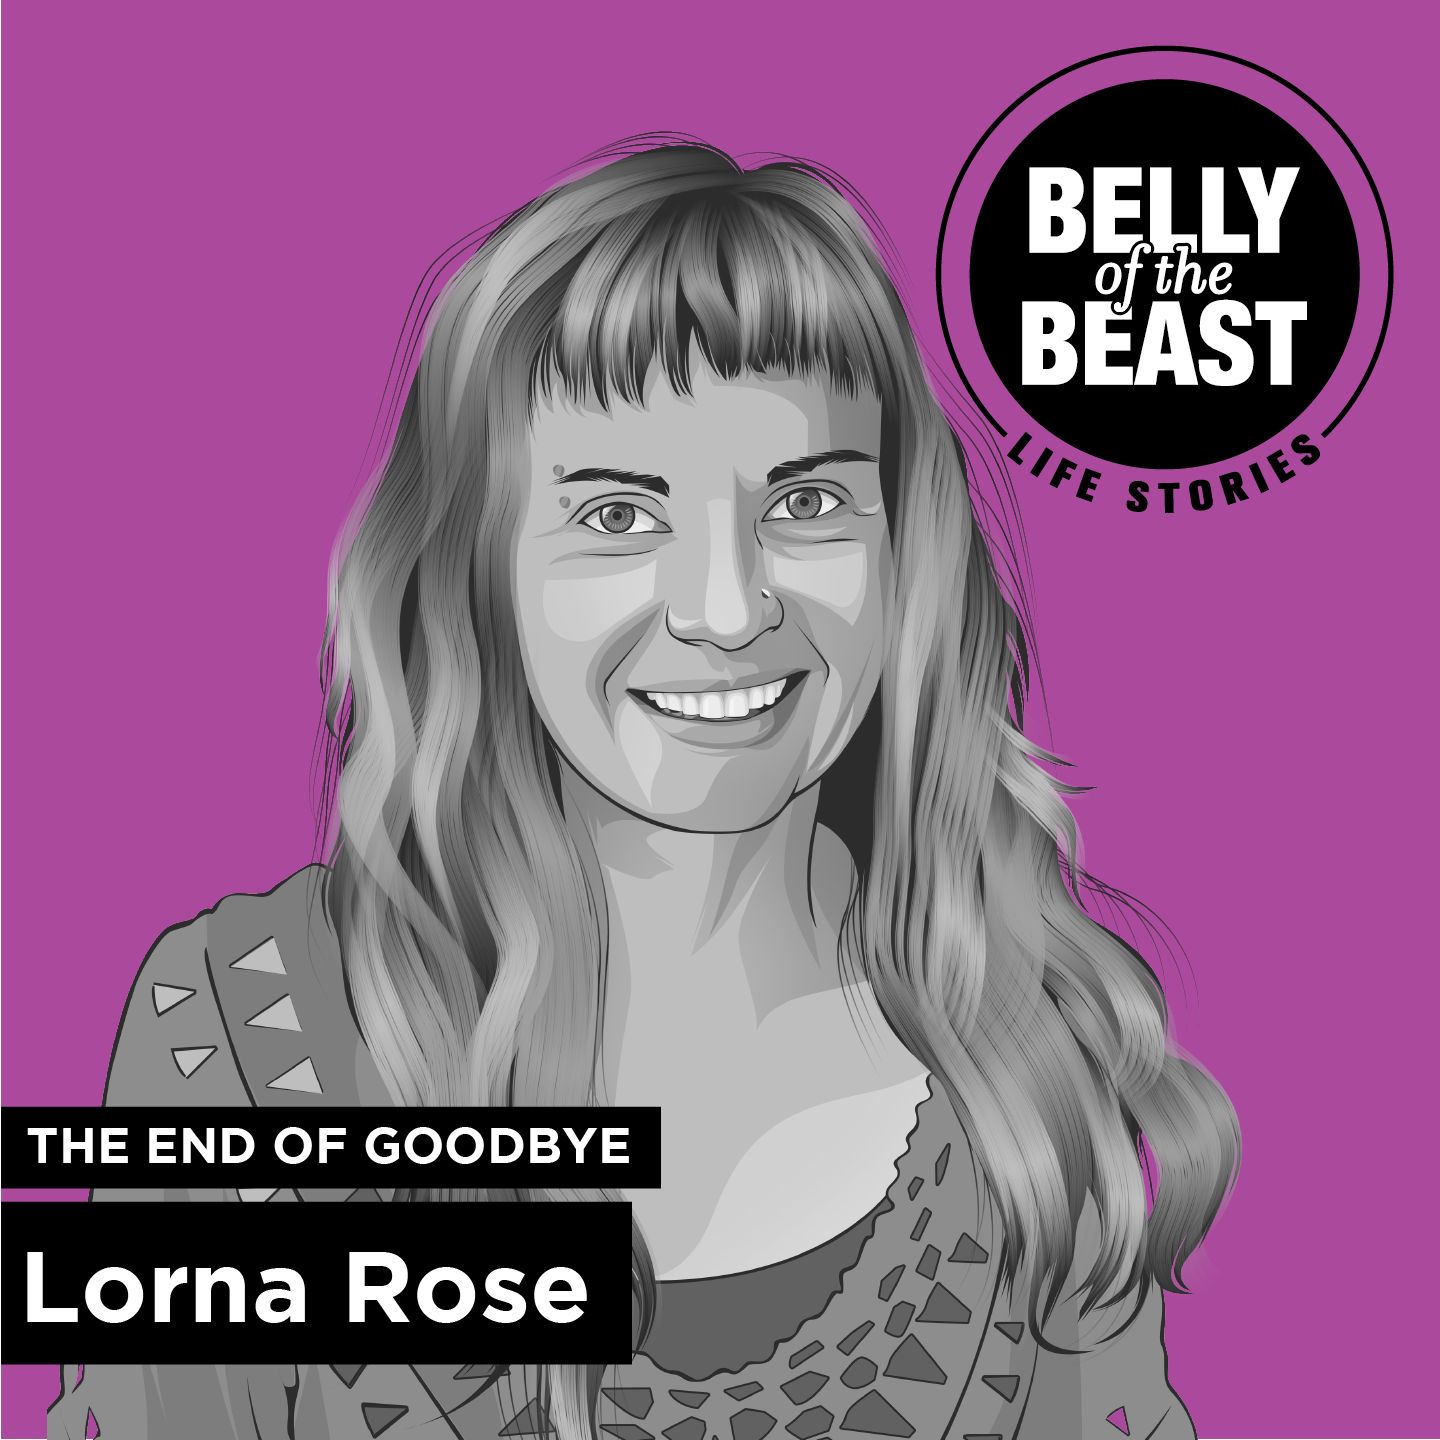 Facing Miscarriage with Lorna Rose